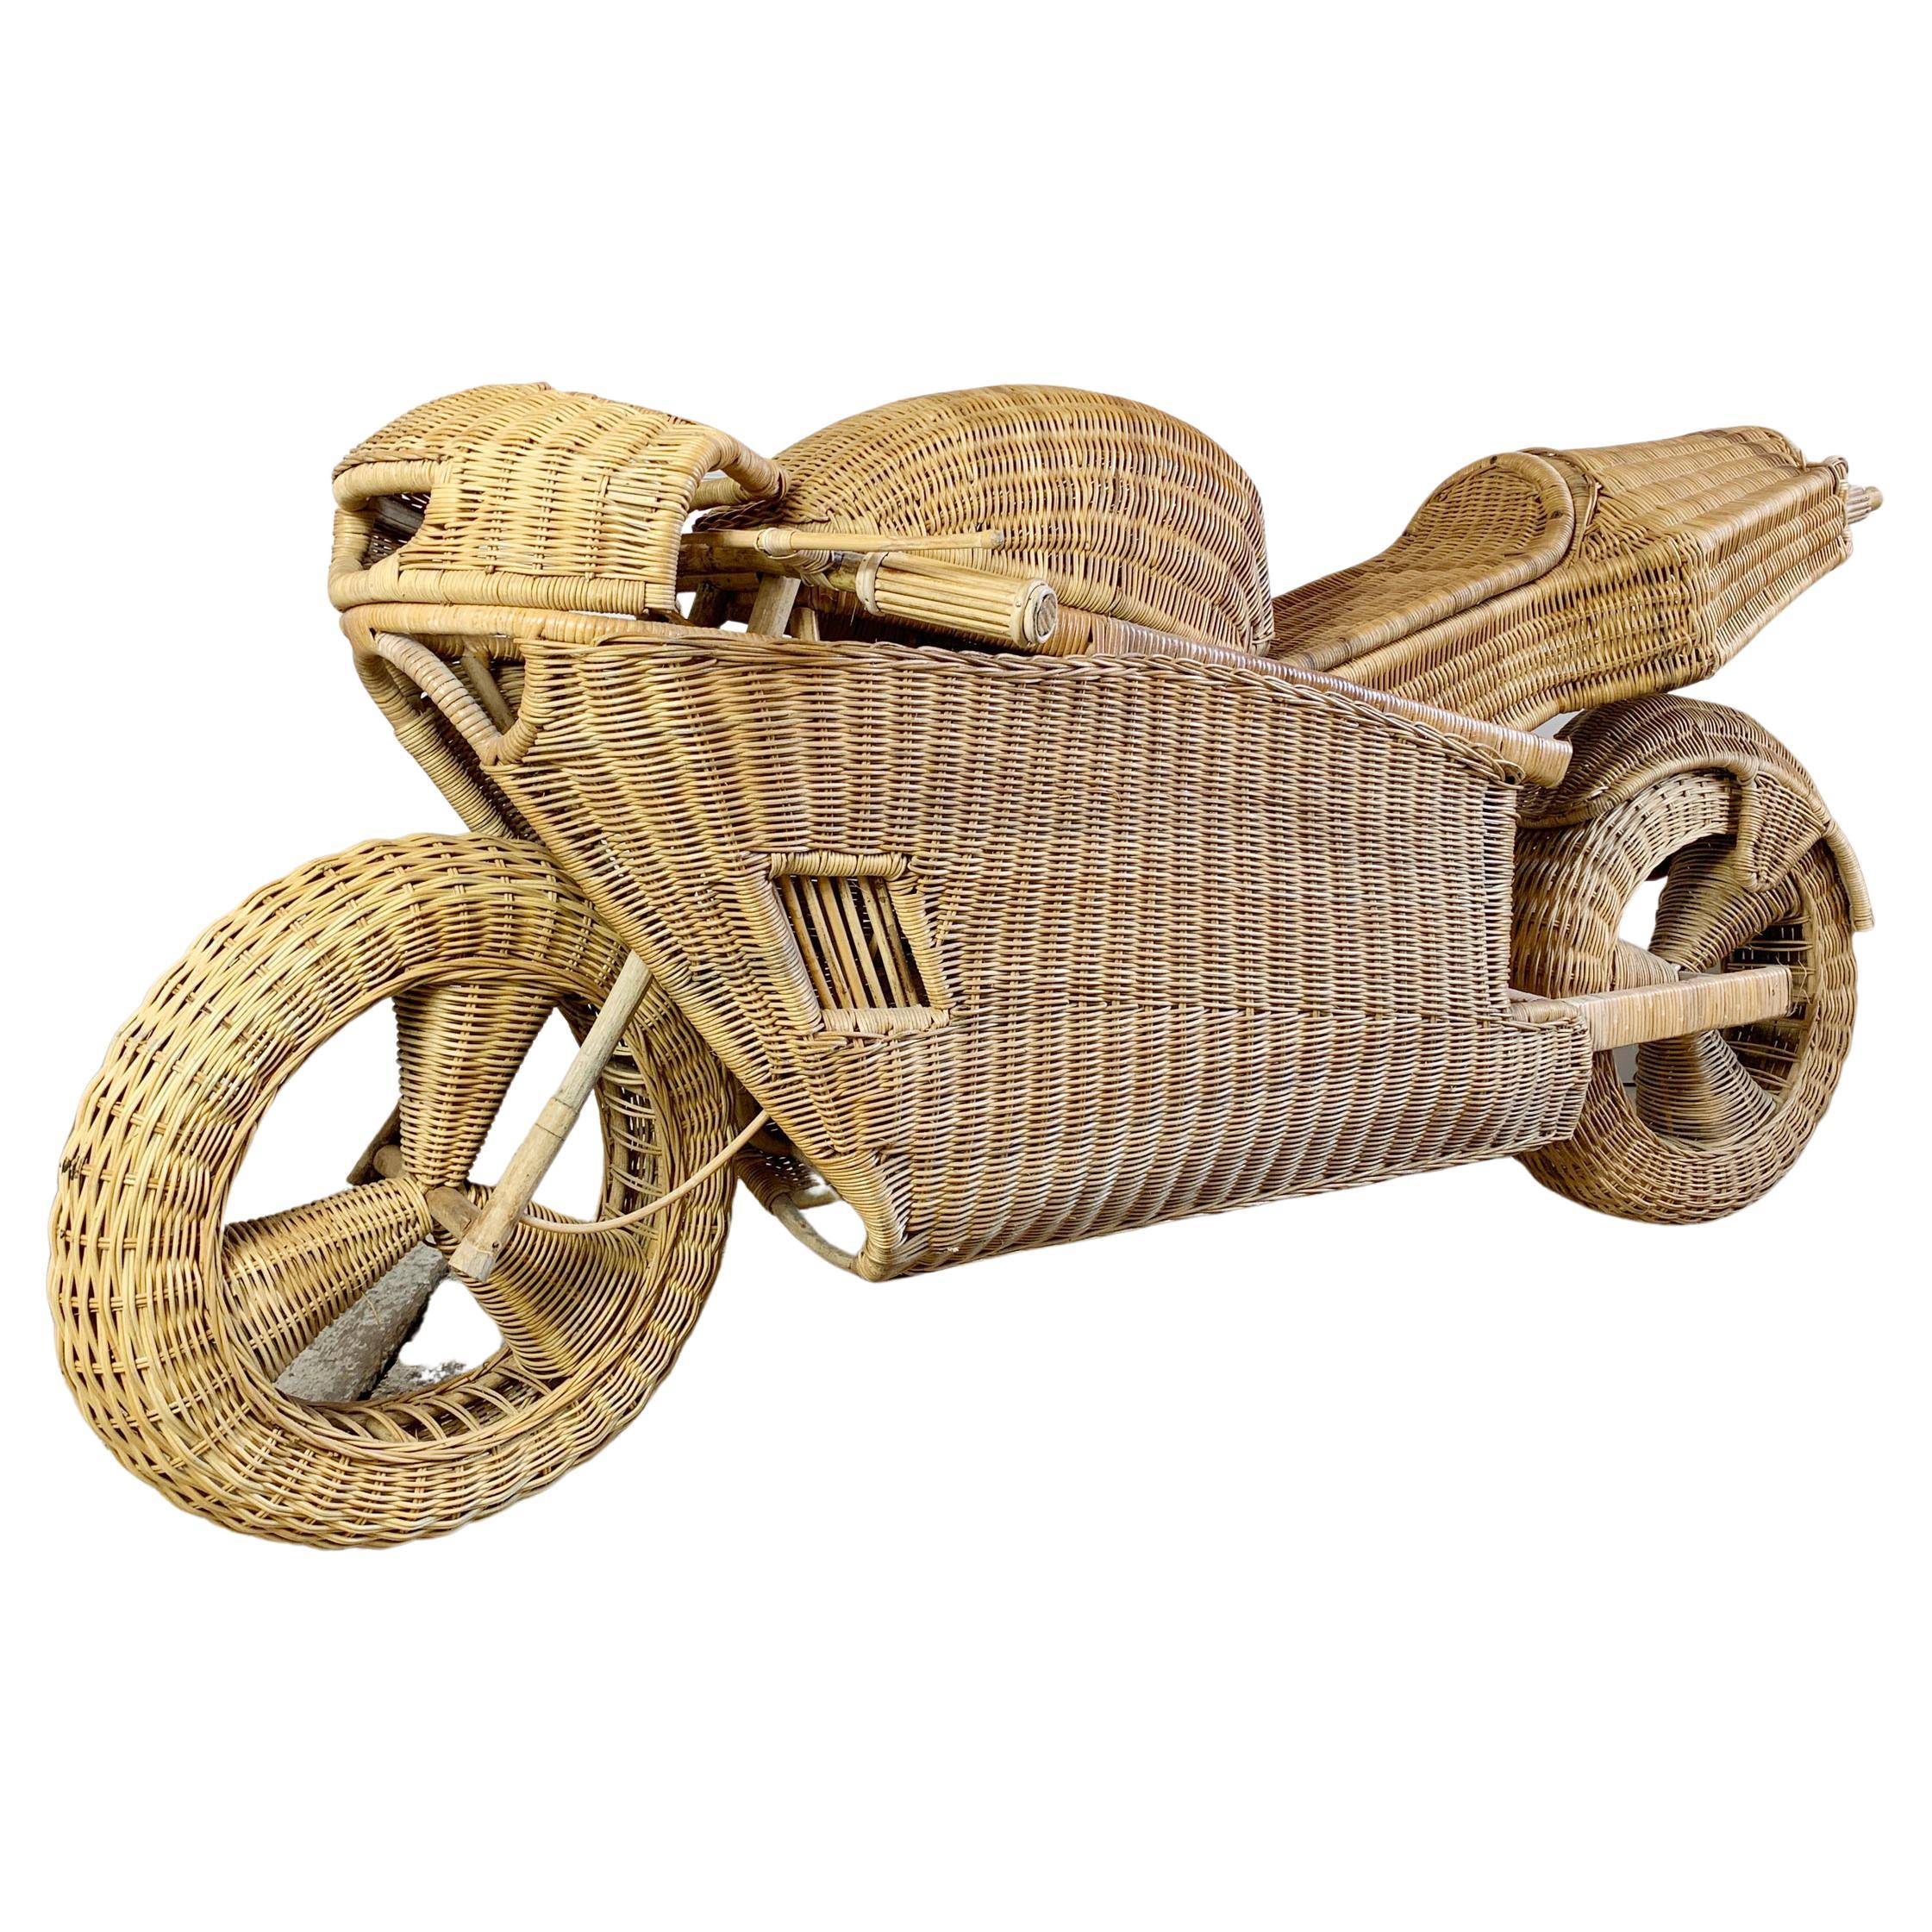 Exceptional Life Size Wicker and Bamboo Racing Motorcycle